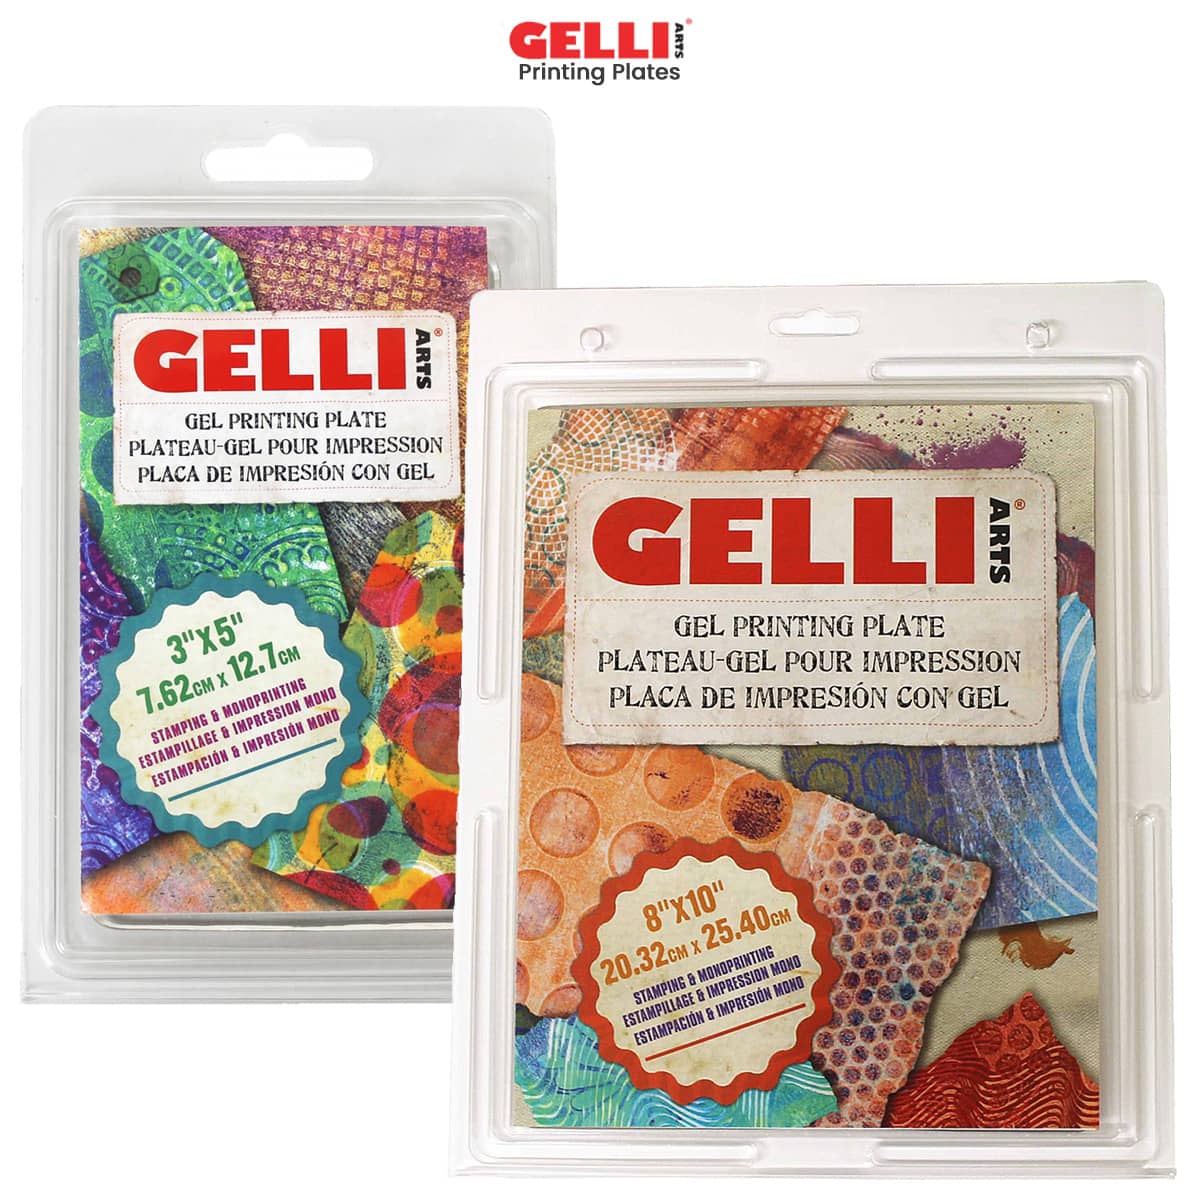  Gelli Arts Gel Printing Plate - 8 X 10 Gel Plate, Reusable  Gel Printing Plate, Printmaking Gelli Plate for Art, Clear Gel Monoprinting  Plate, Gel Plate Printing for Arts and Crafts